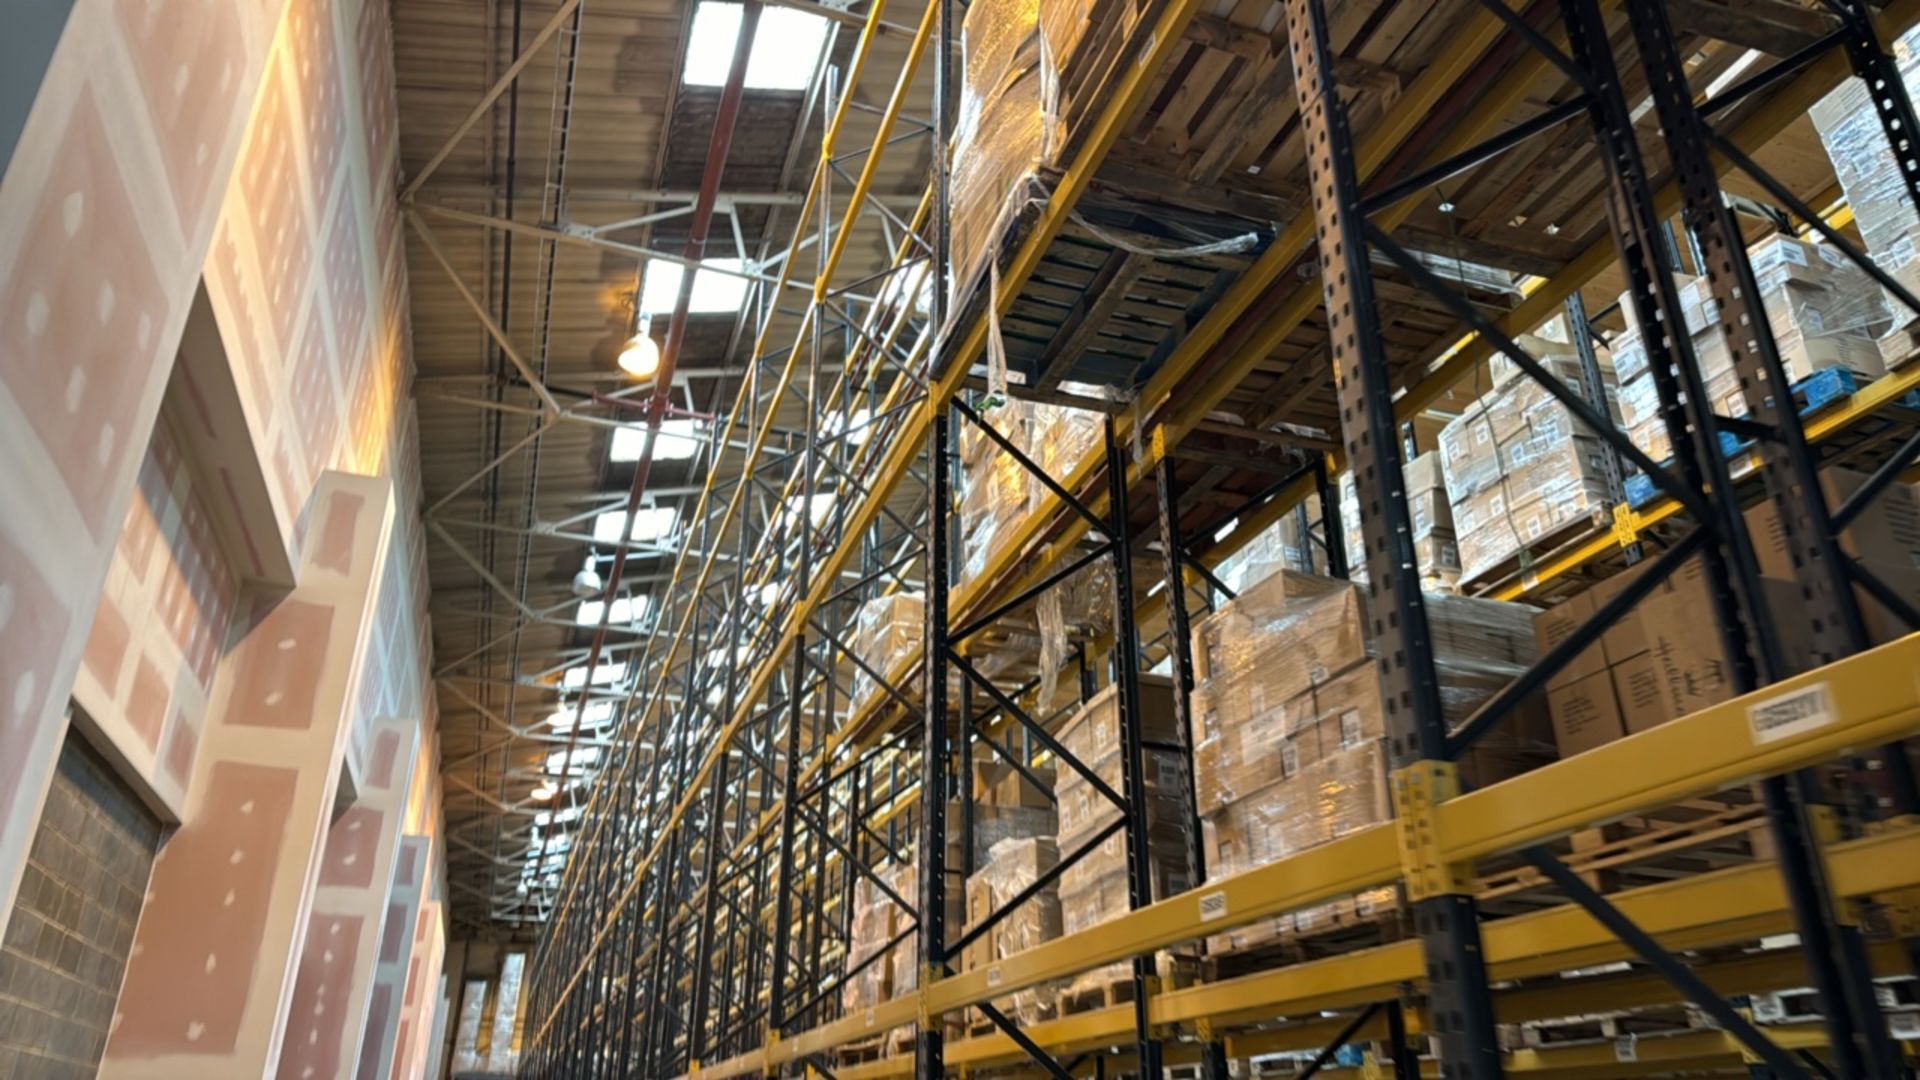 Run Of 23 Bays Of Back To Back Boltless Industrial Pallet Racking - Image 11 of 12